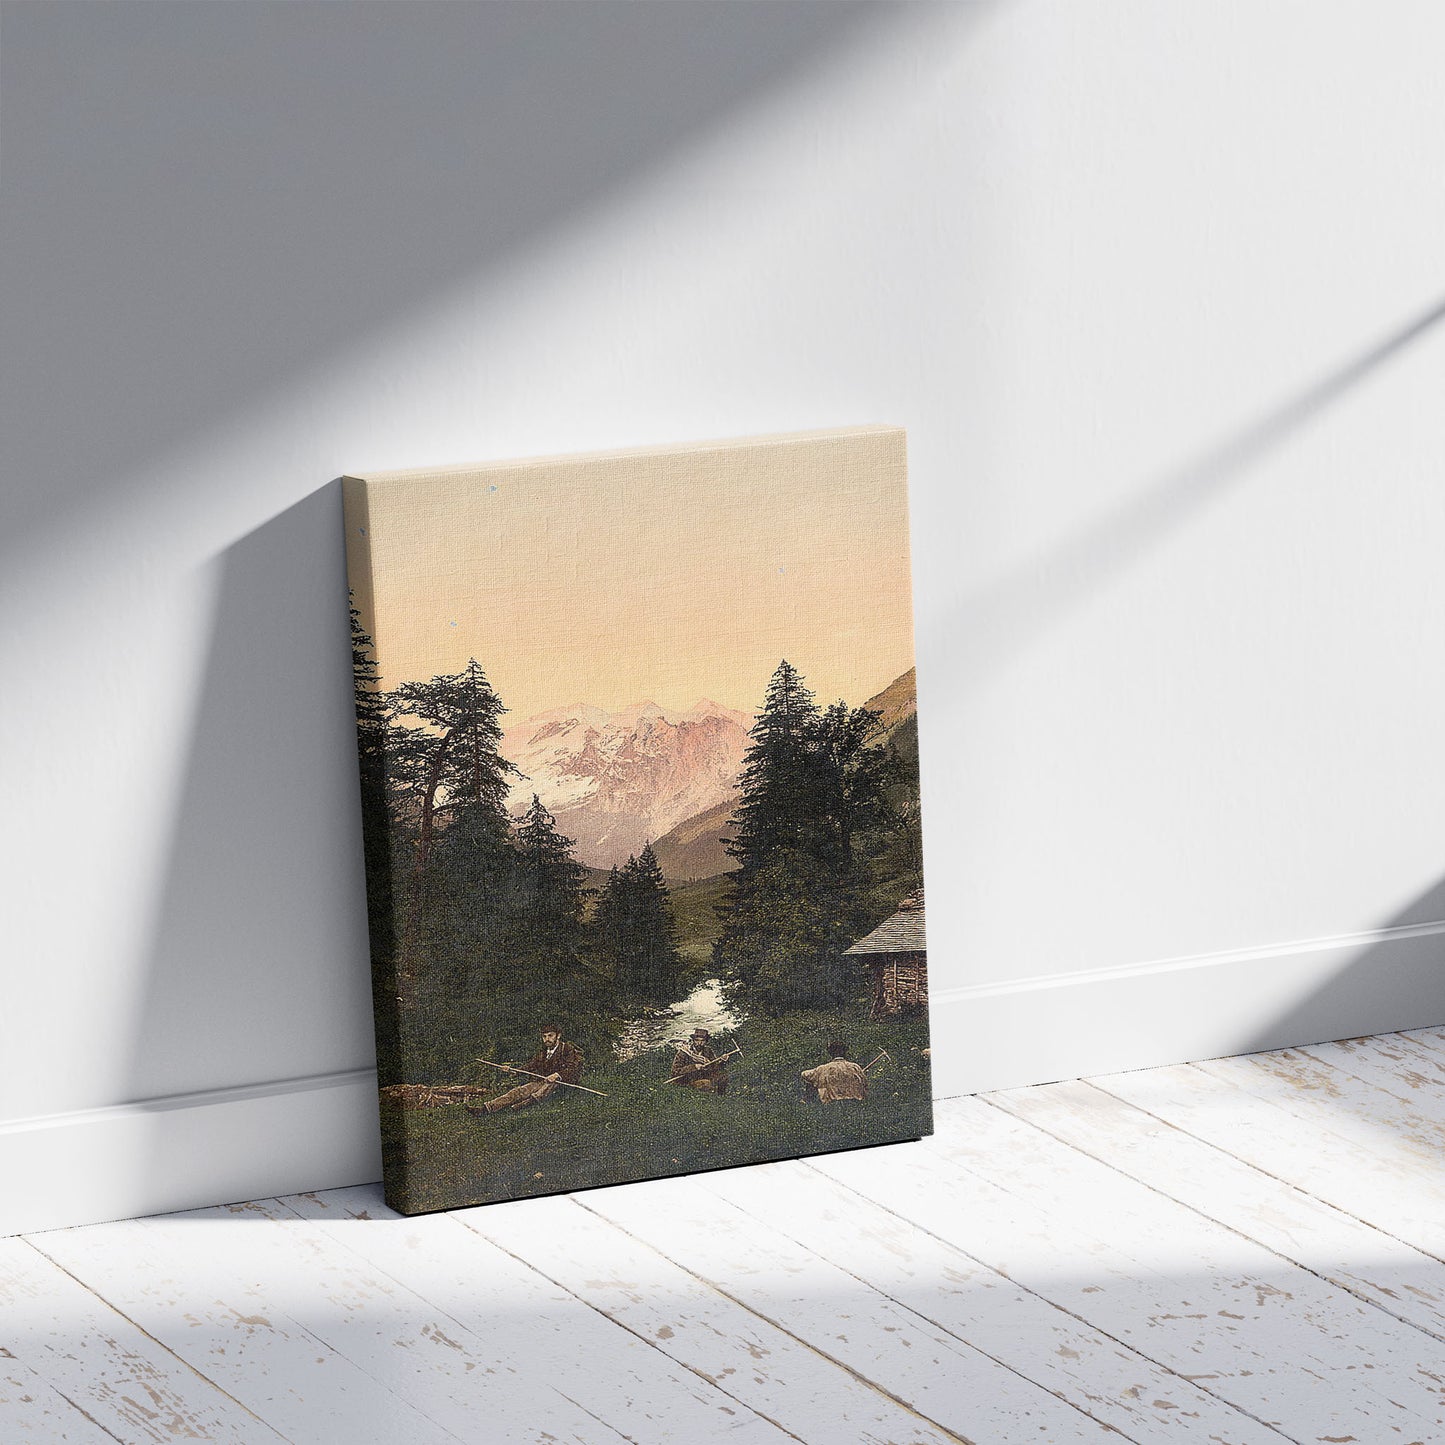 A picture of Jochpass and Wetterhorn, Unterwald, Switzerland, a mockup of the print leaning against a wall